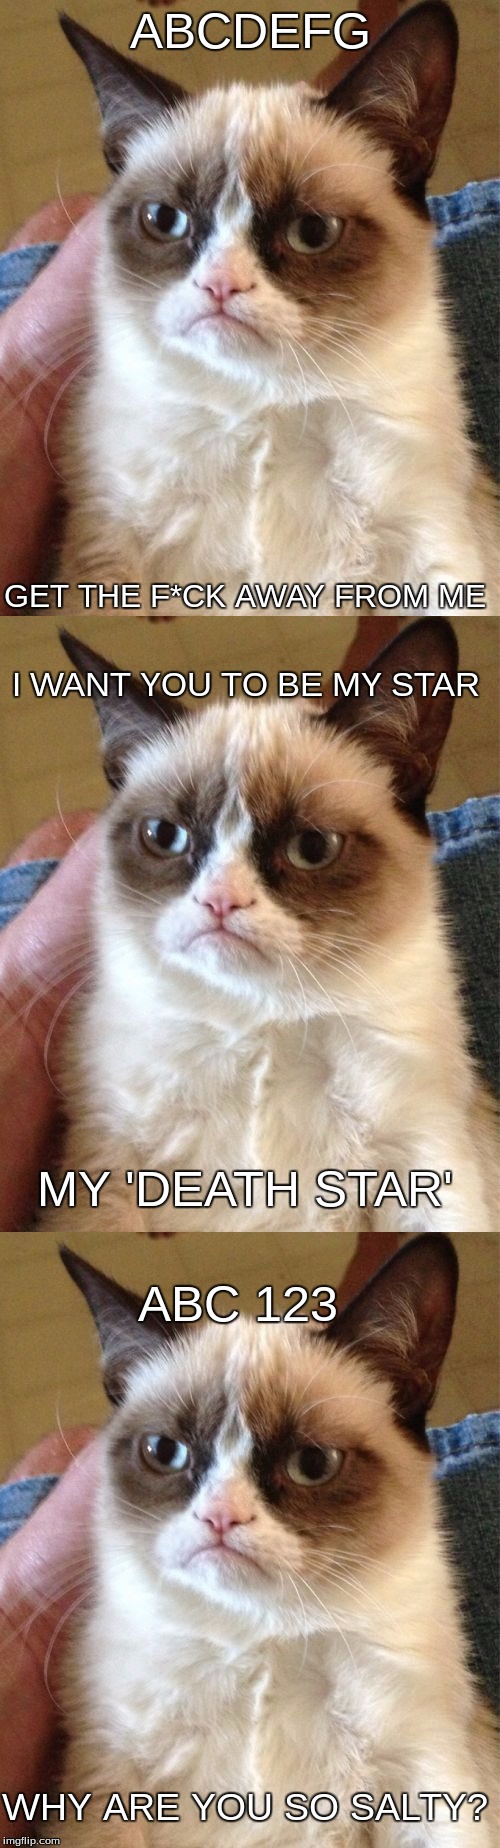 They kinda rhyme | ABCDEFG; GET THE F*CK AWAY FROM ME; I WANT YOU TO BE MY STAR; MY 'DEATH STAR'; ABC 123; WHY ARE YOU SO SALTY? | image tagged in grumpy cat,rhymes,memes | made w/ Imgflip meme maker